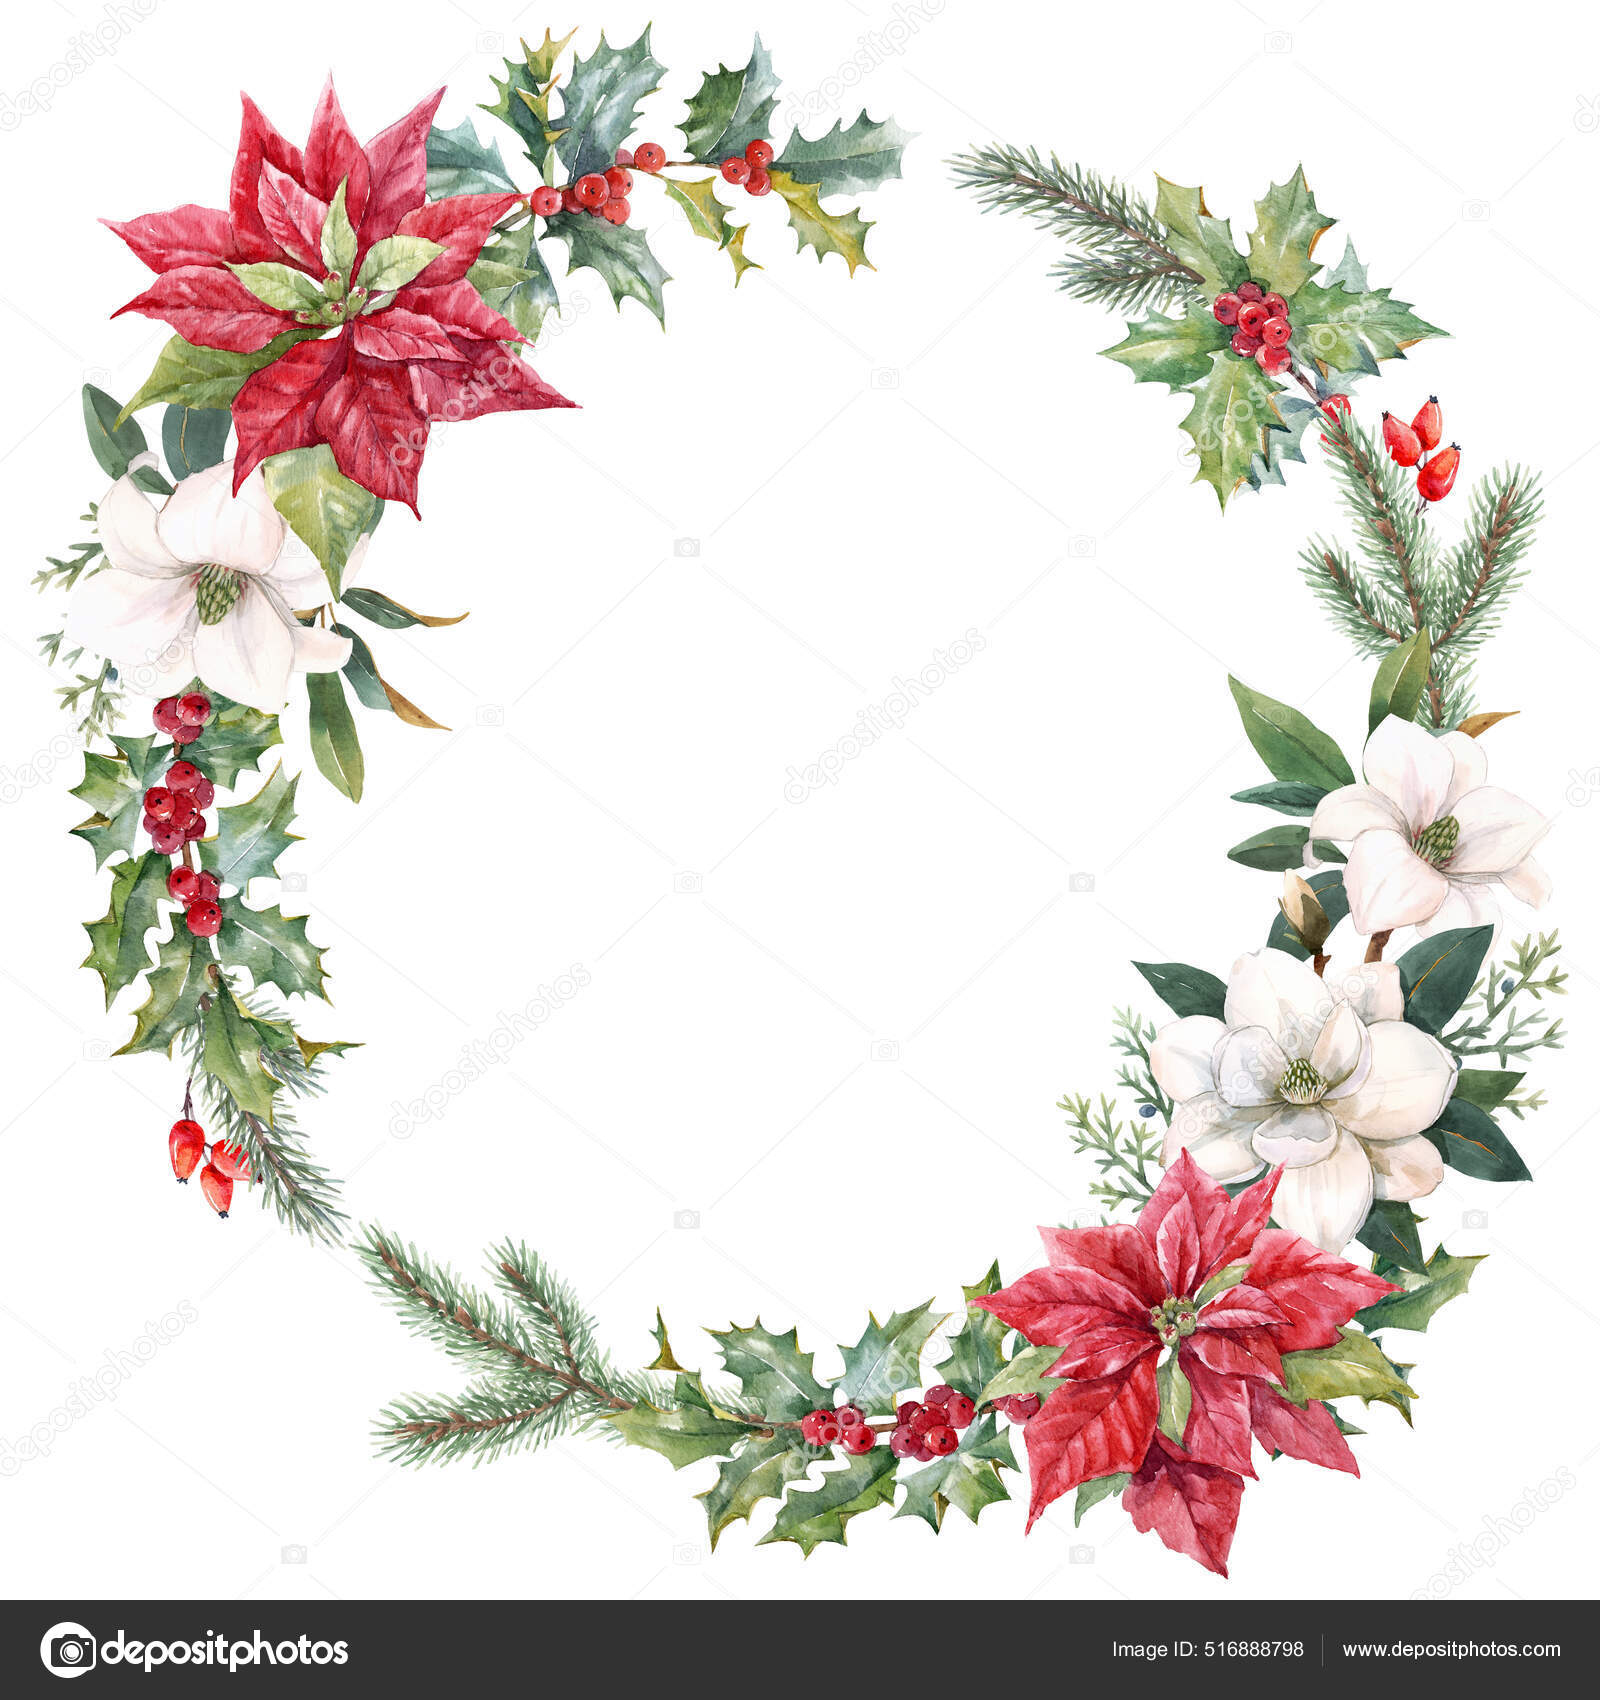 Framed Canvas Art (Champagne) - Merry Christmas Holly Wreath by Seven Trees Design (styles > Decorative Art > Holiday Décor > Christmas > Christmas